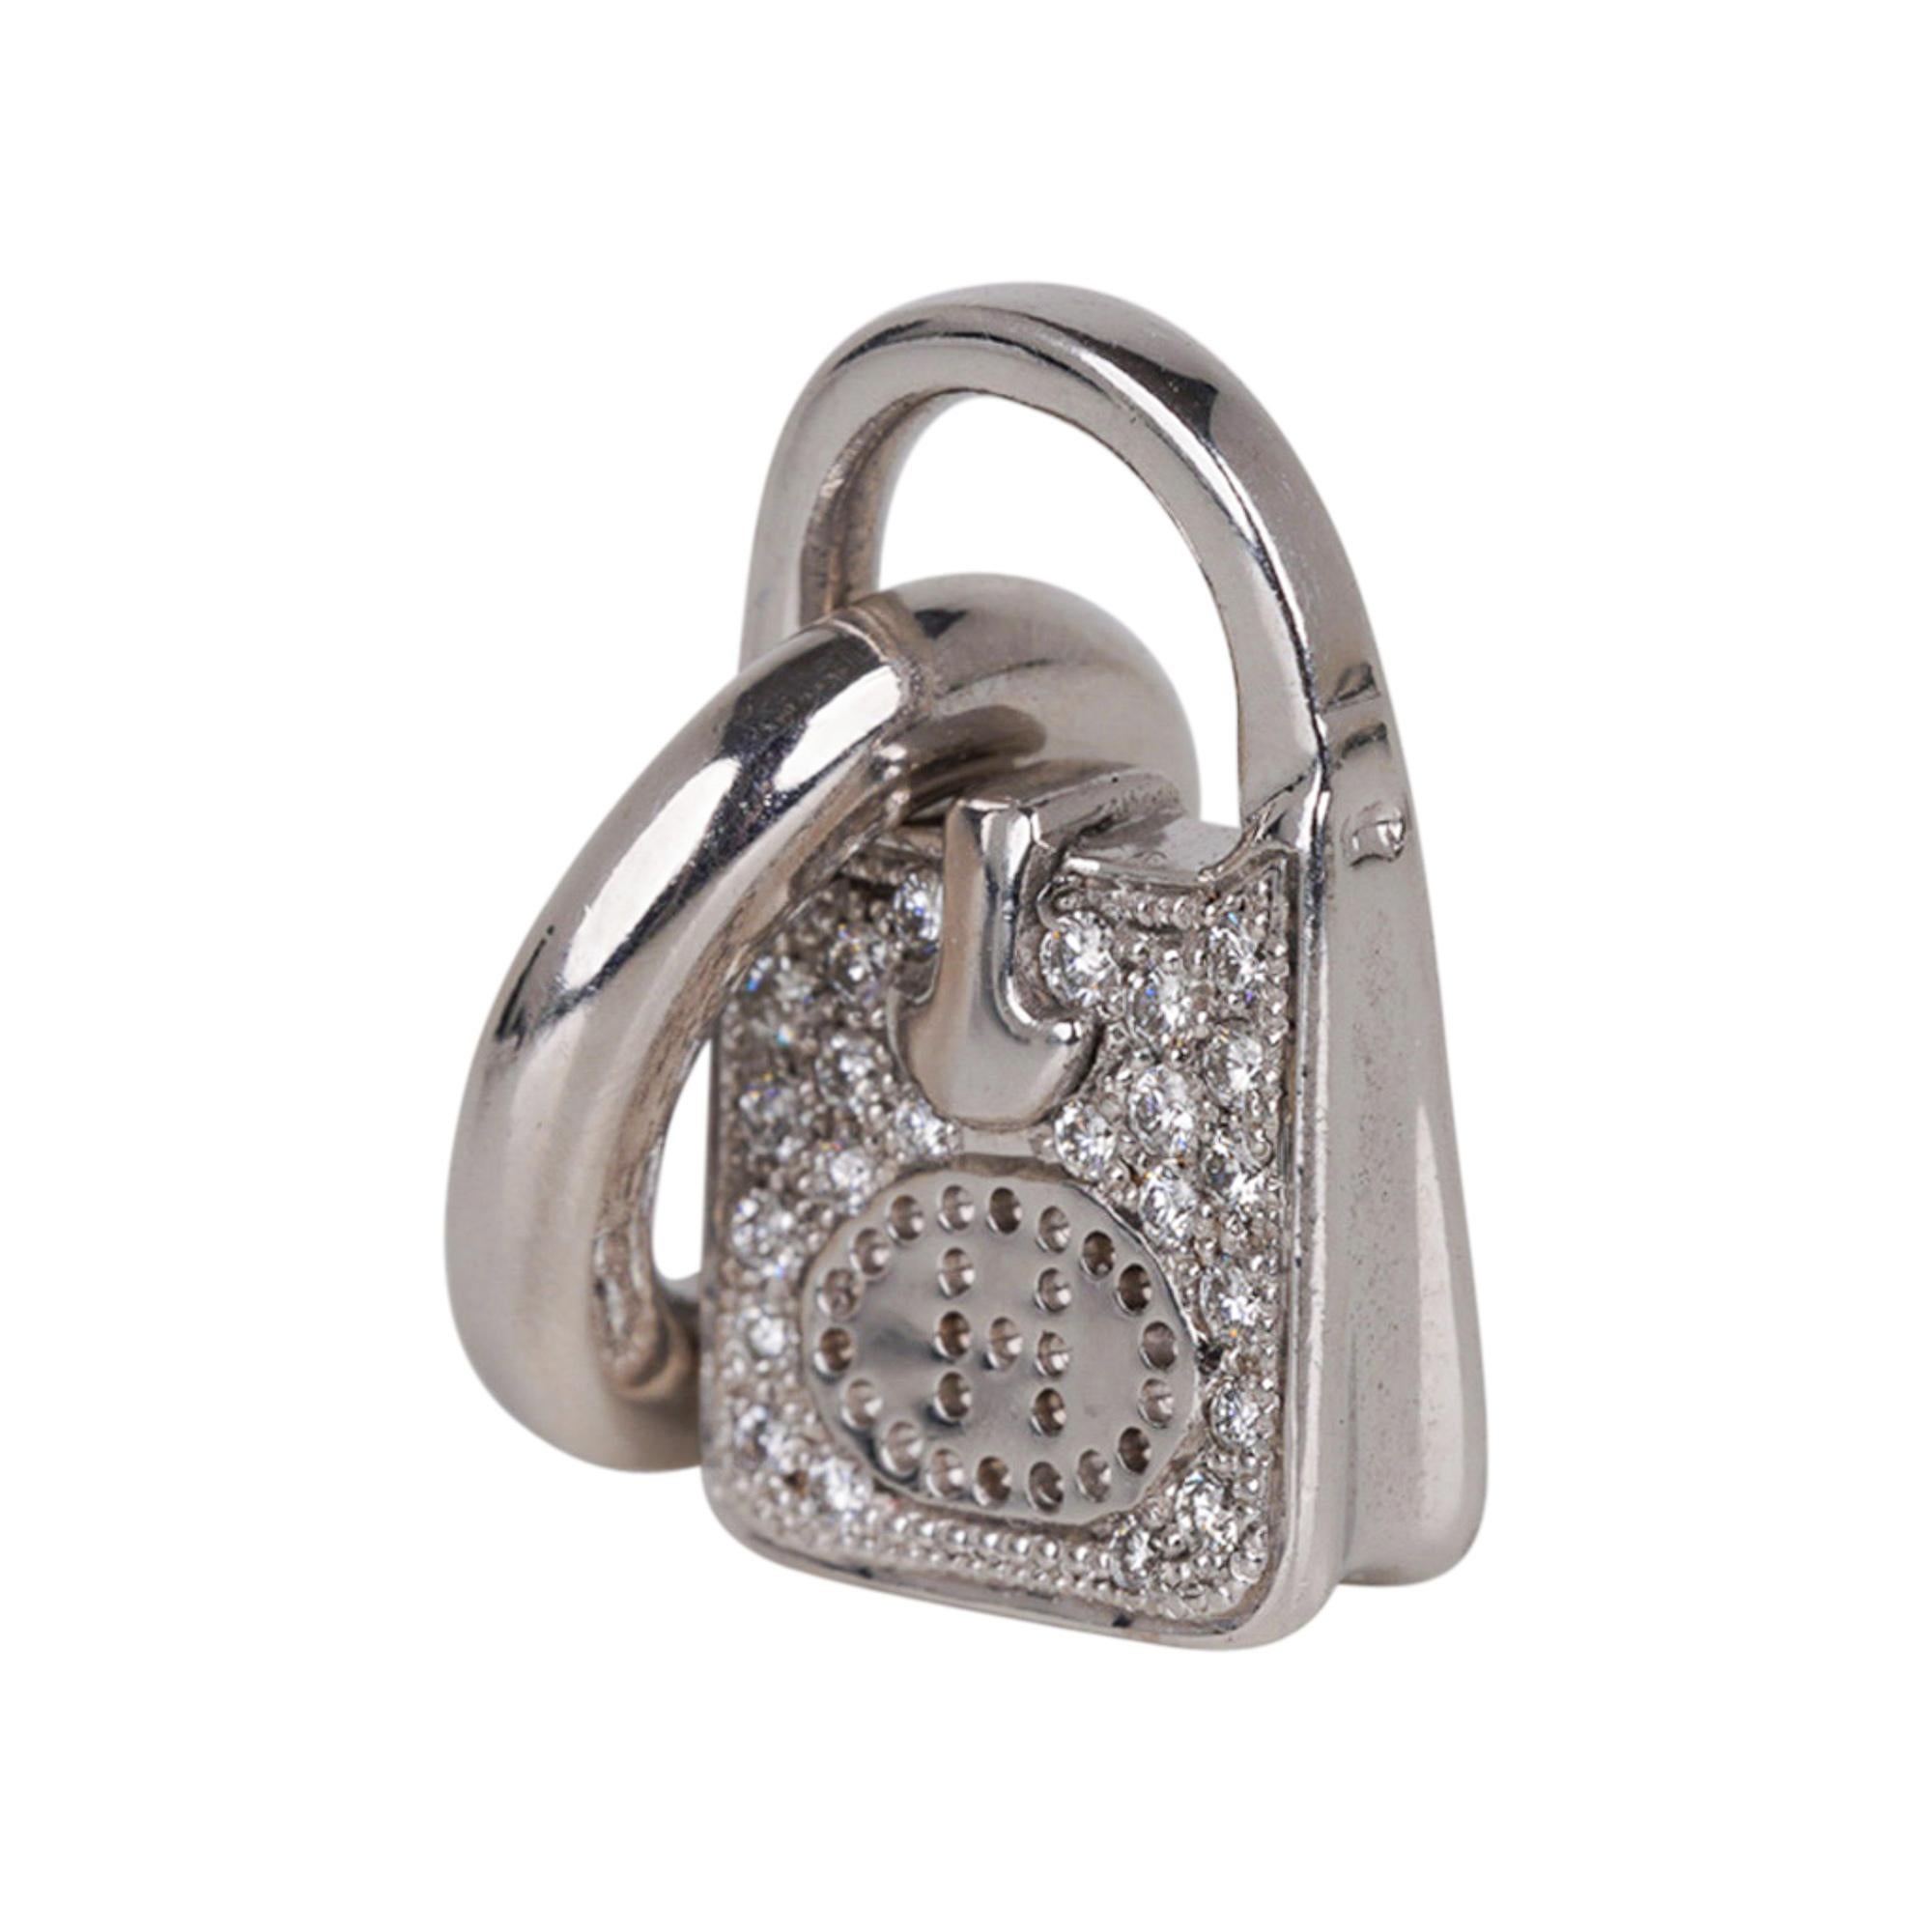 Mightychic offers an Hermes Diamond 18k White Gold Evelyne Bag amulette /charm.
This rare Hermes Evelyne charm piece can be worn as a pendant or on a bracelet.
Carefully crafted in exquisite detail including the perforated H!
Signature stamps on